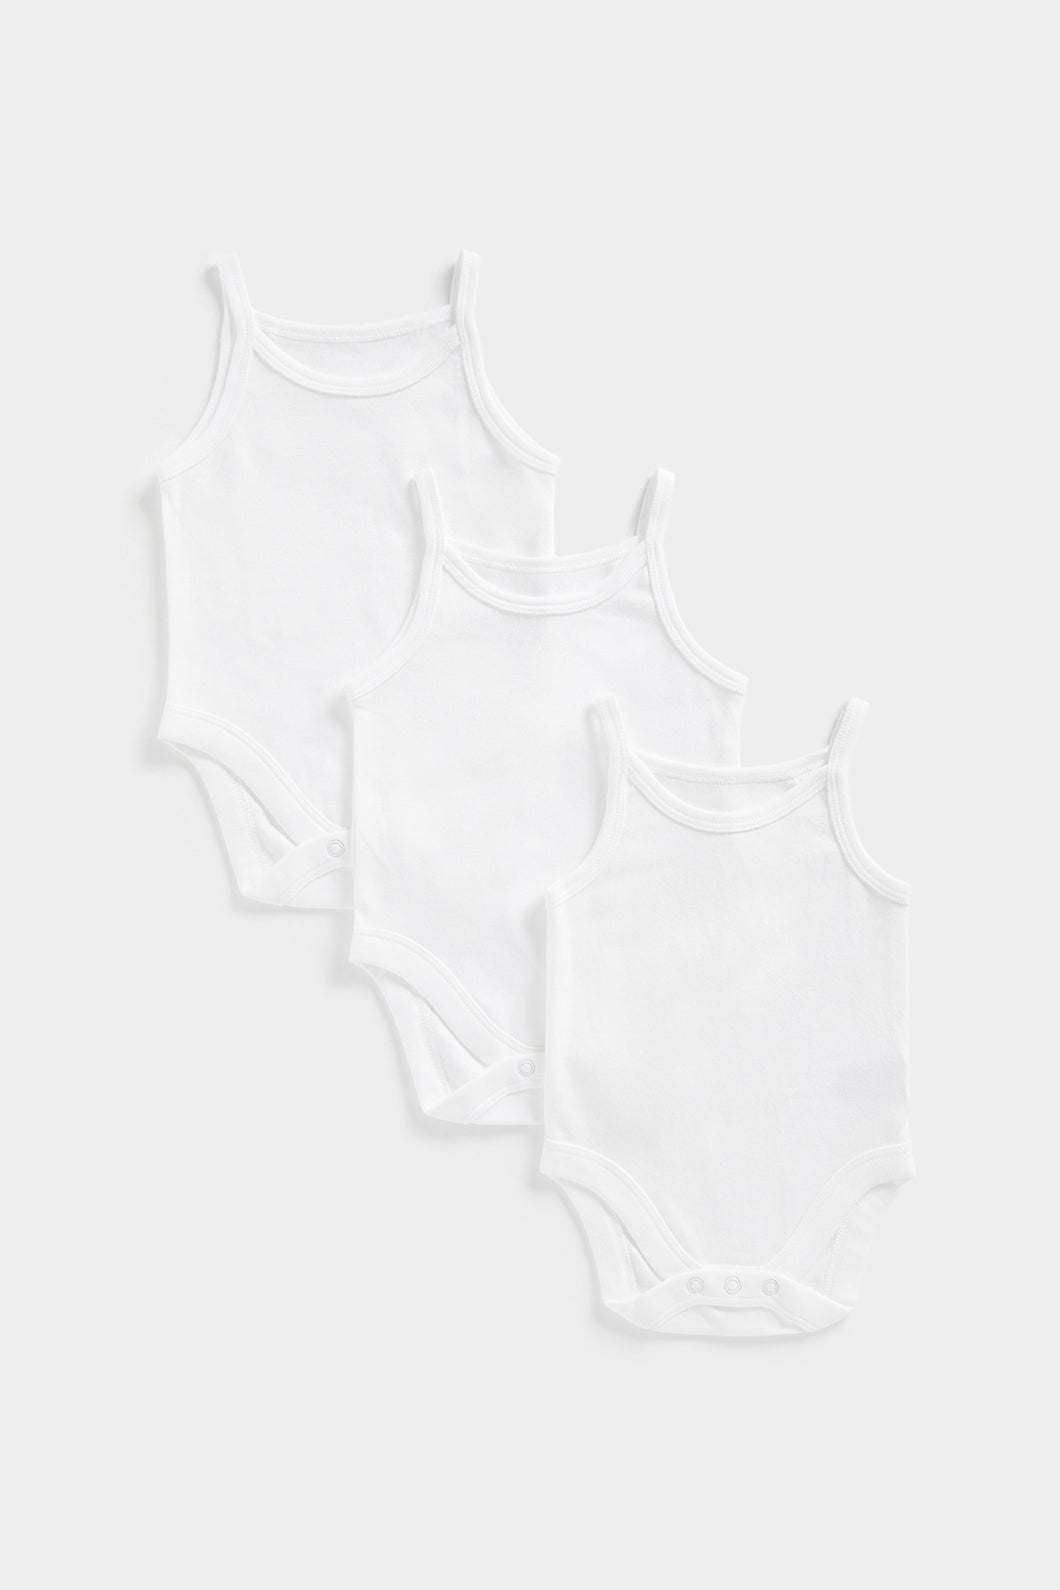 Mothercare White Cami Bodysuits - 3 Pack